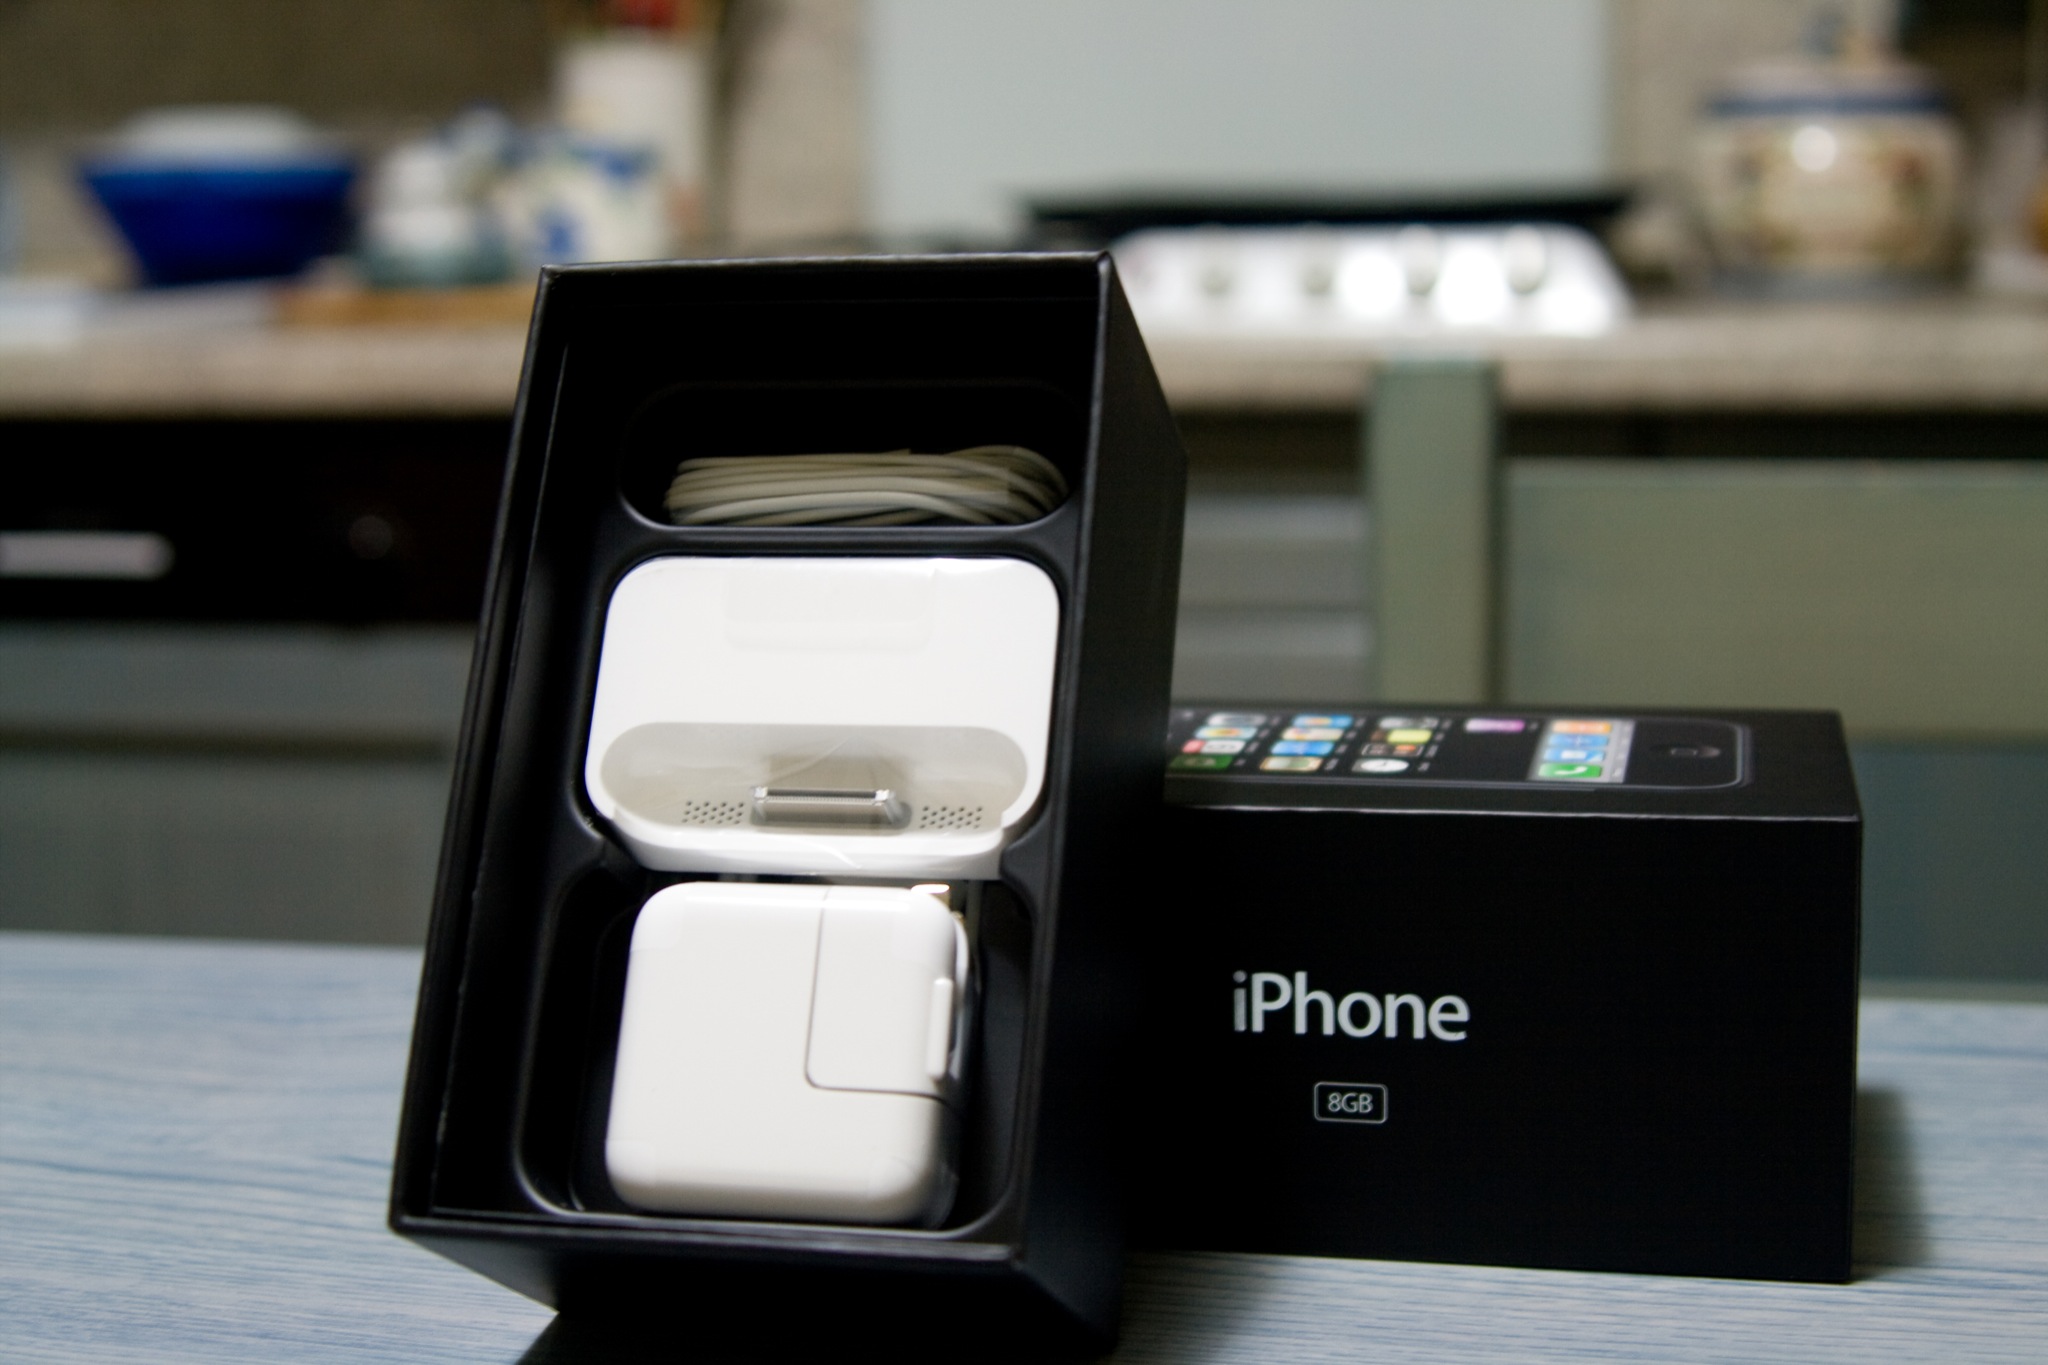 a boxed iphone is shown in its box